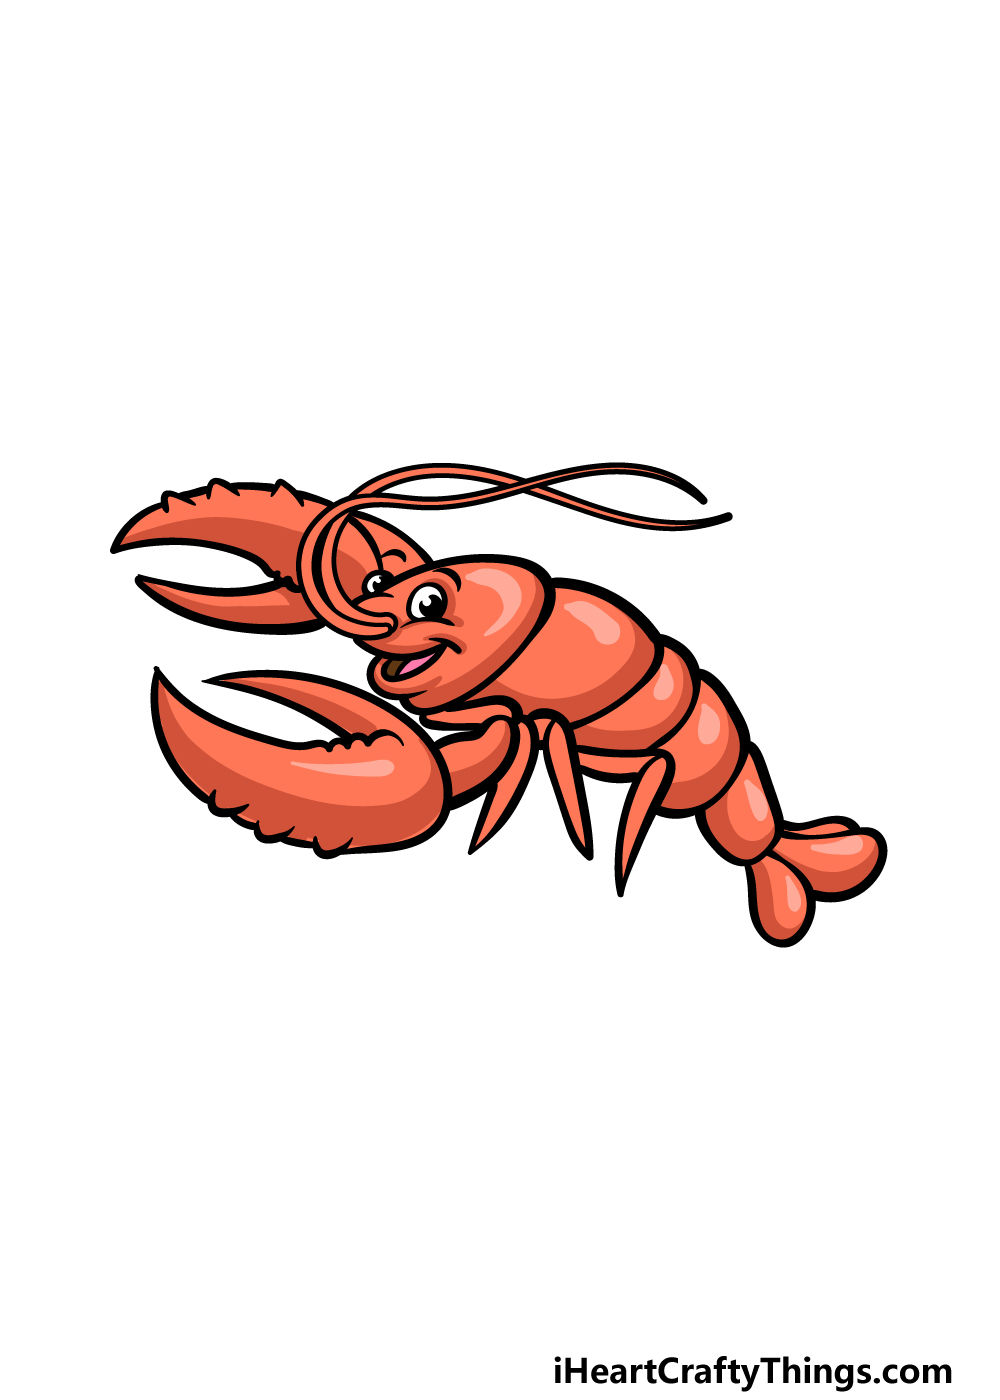 Cartoon Lobster Drawing - How To Draw A Cartoon Lobster Step By Step